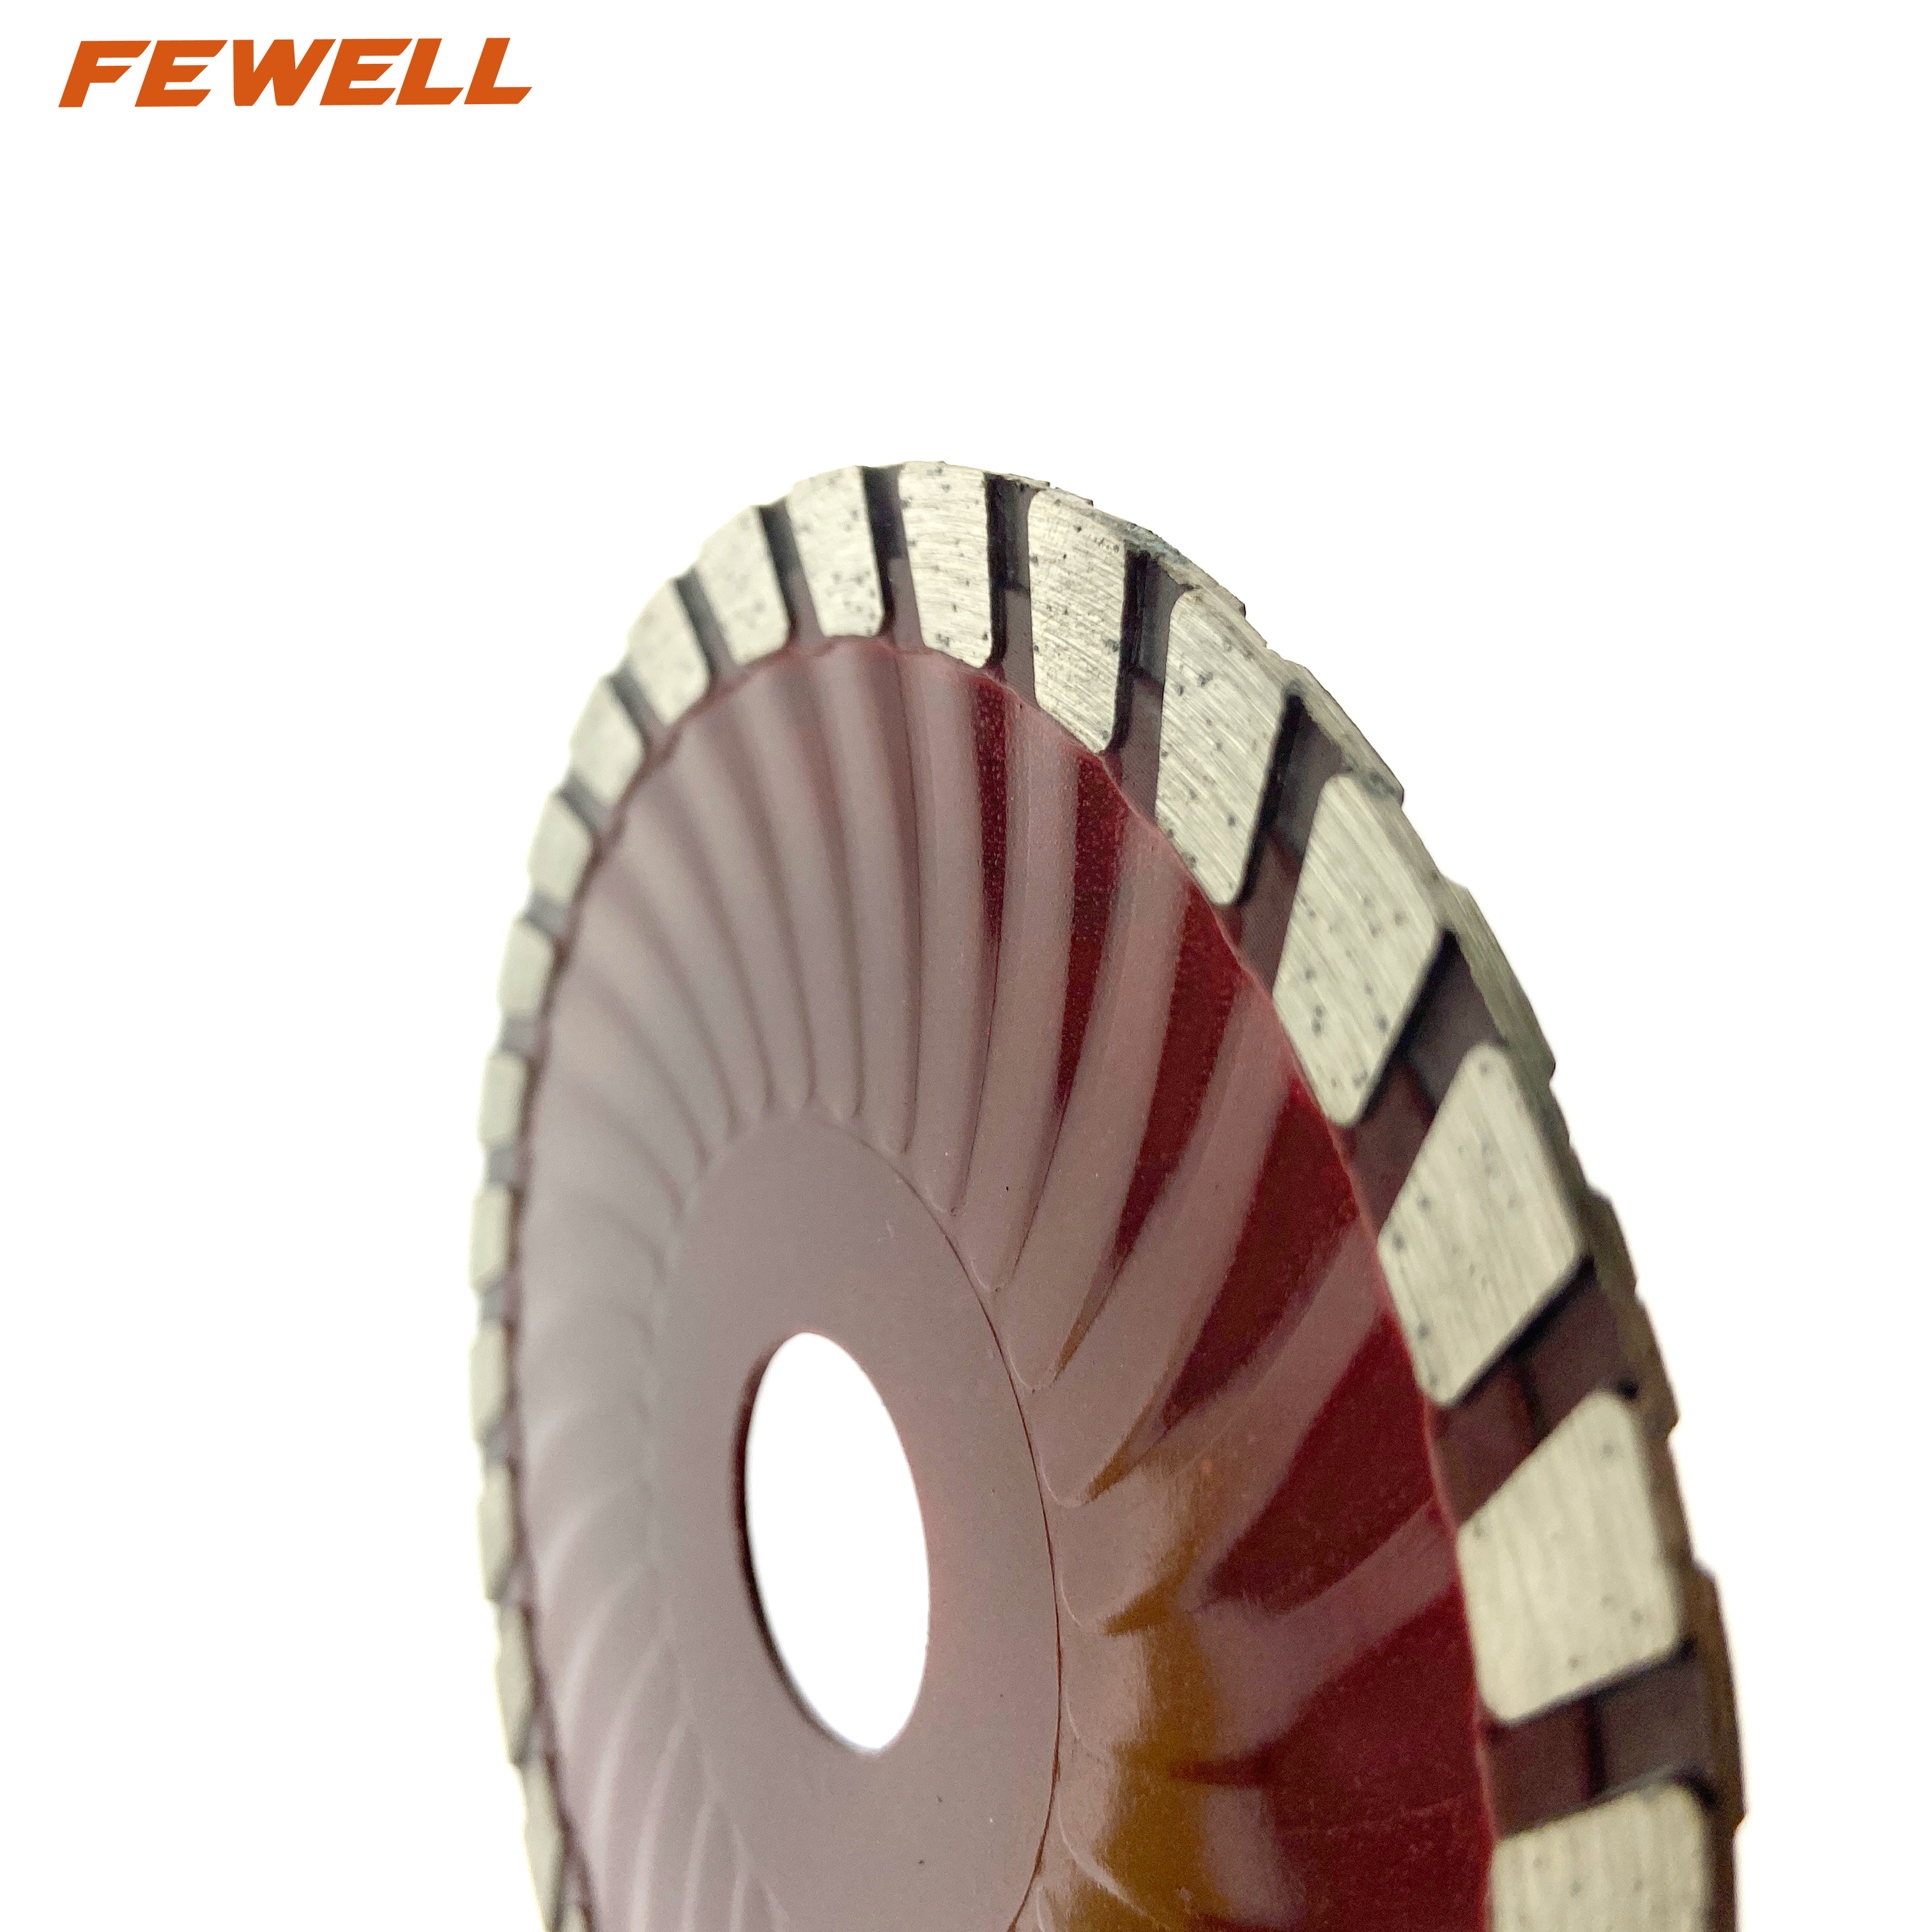 High quality 4/4.5/5inch 105/115/125*8*22.23mm Hot press sintered Wave turbo diamond saw blade for cutting concrete